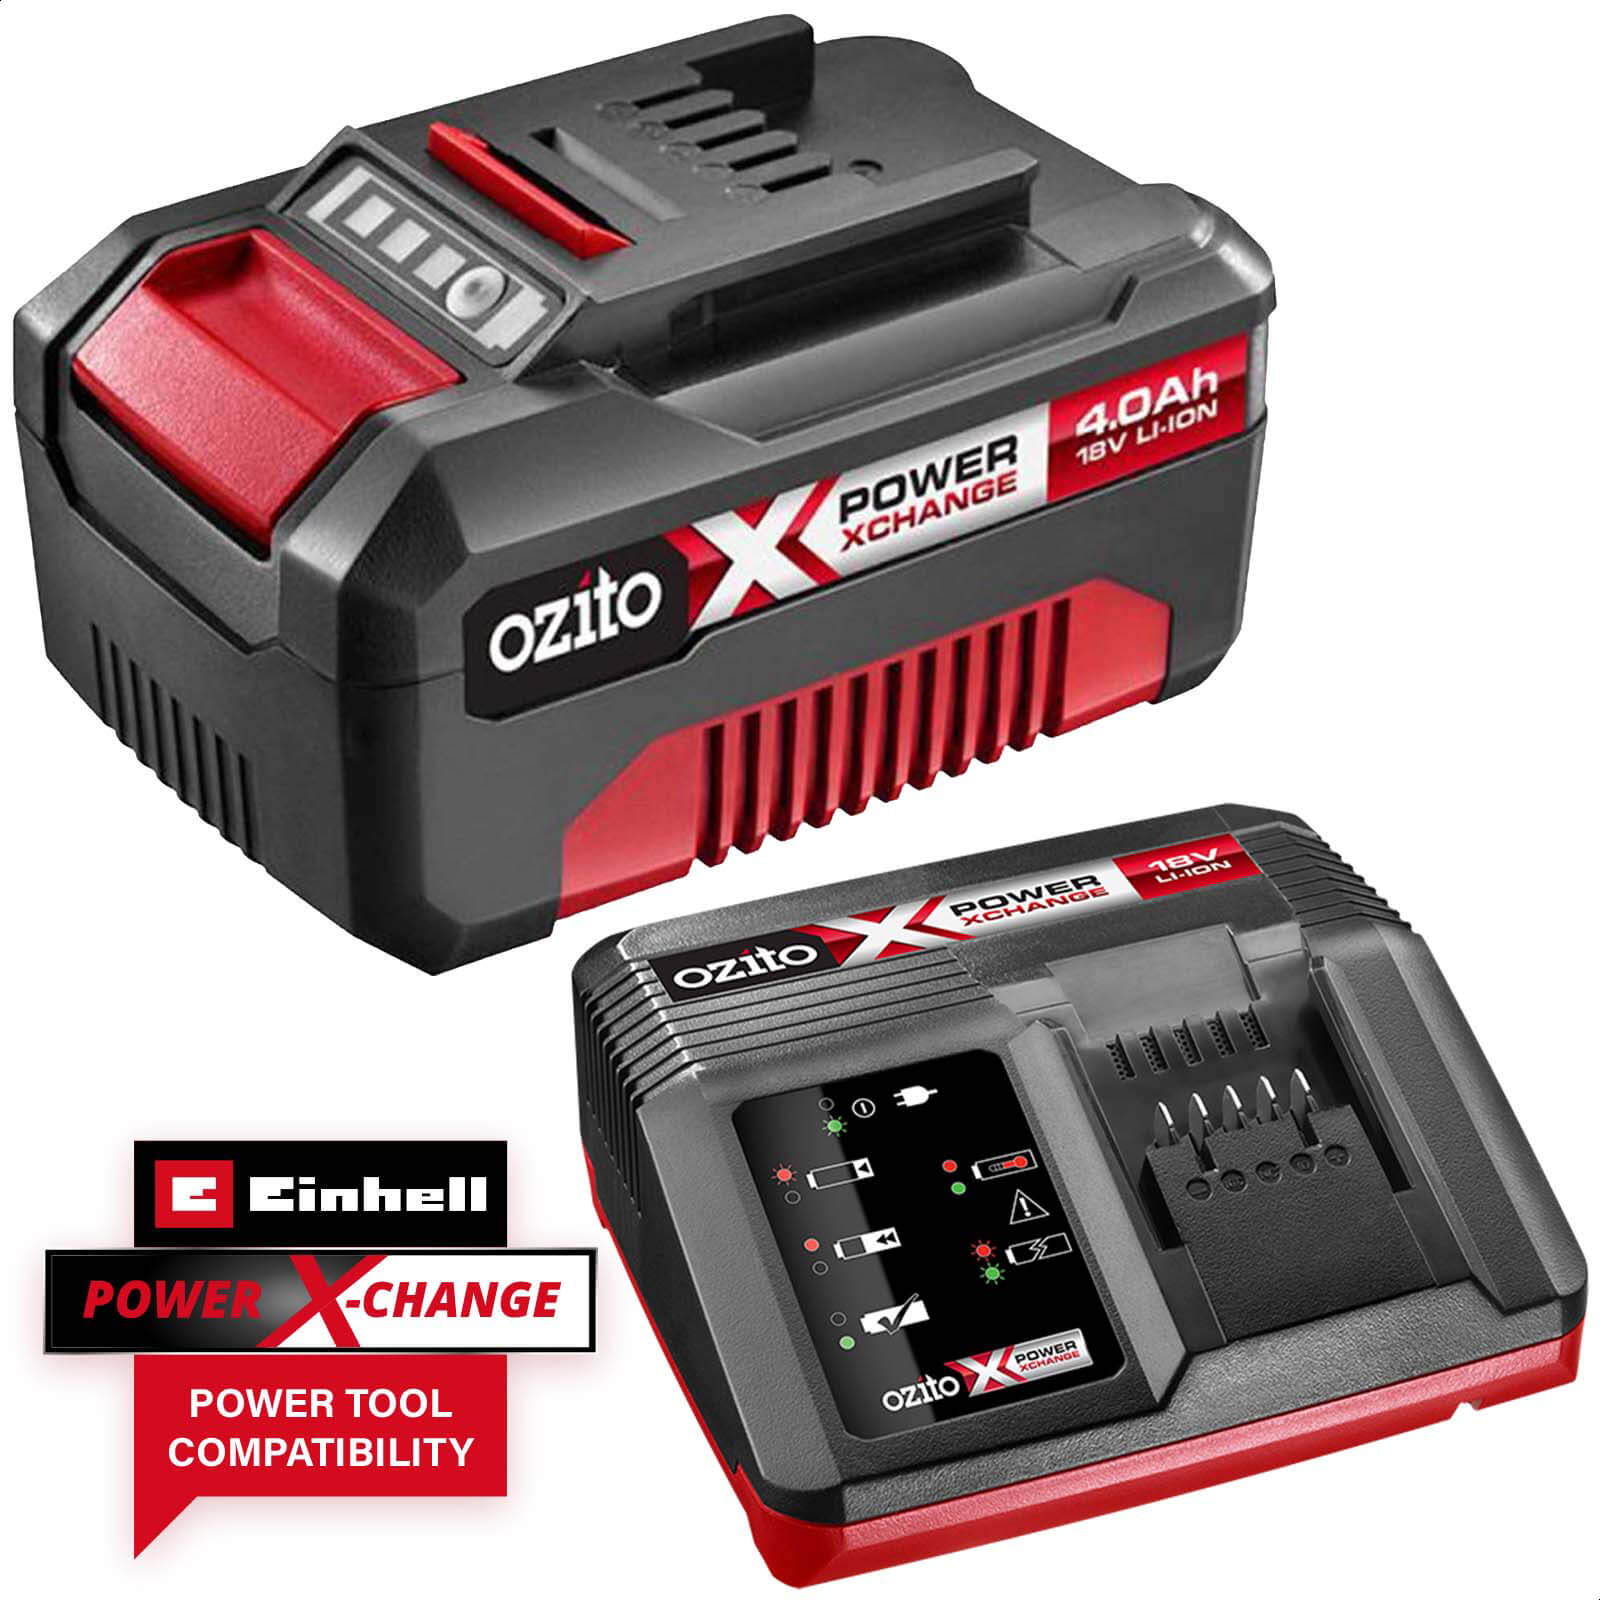 Ozito Genuine 18v Cordless Power X-Change Li-ion Battery 4ah and Fast Charger 4ah